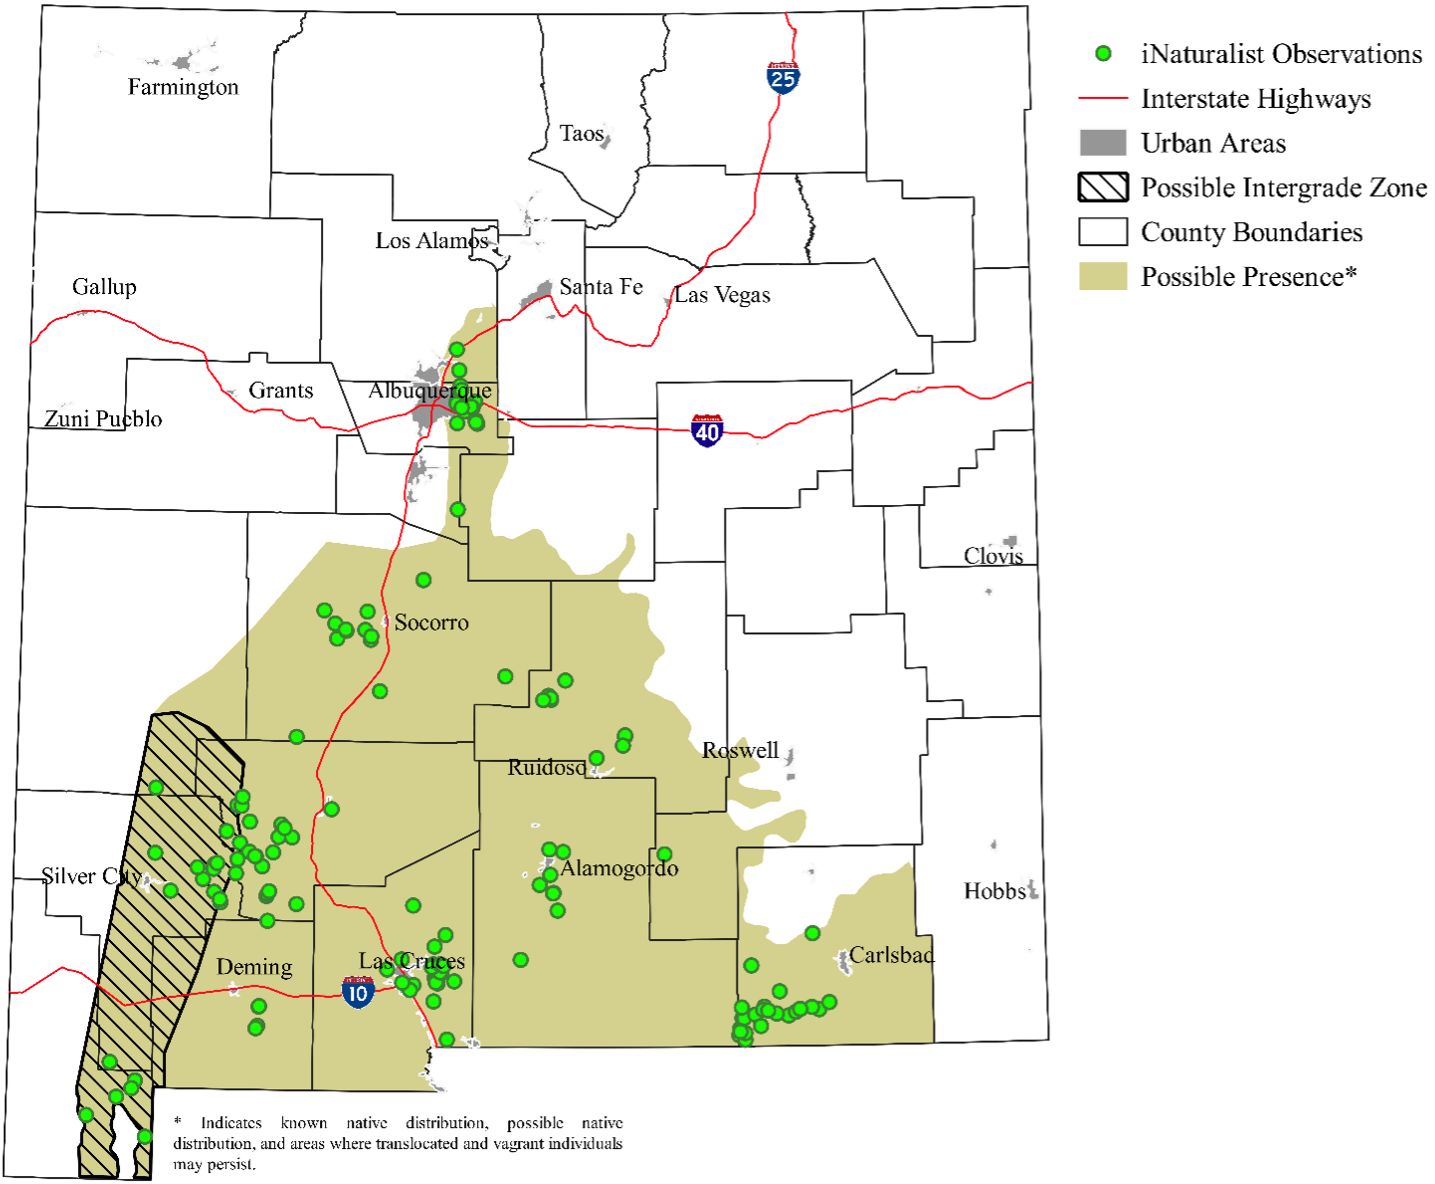 Observations and projected distribution of the eastern black-tailed rattlesnake in New Mexico. The possible intergrade zone in southwestern New Mexico is an area where the two species of black-tailed rattlesnakes may hybridize. 